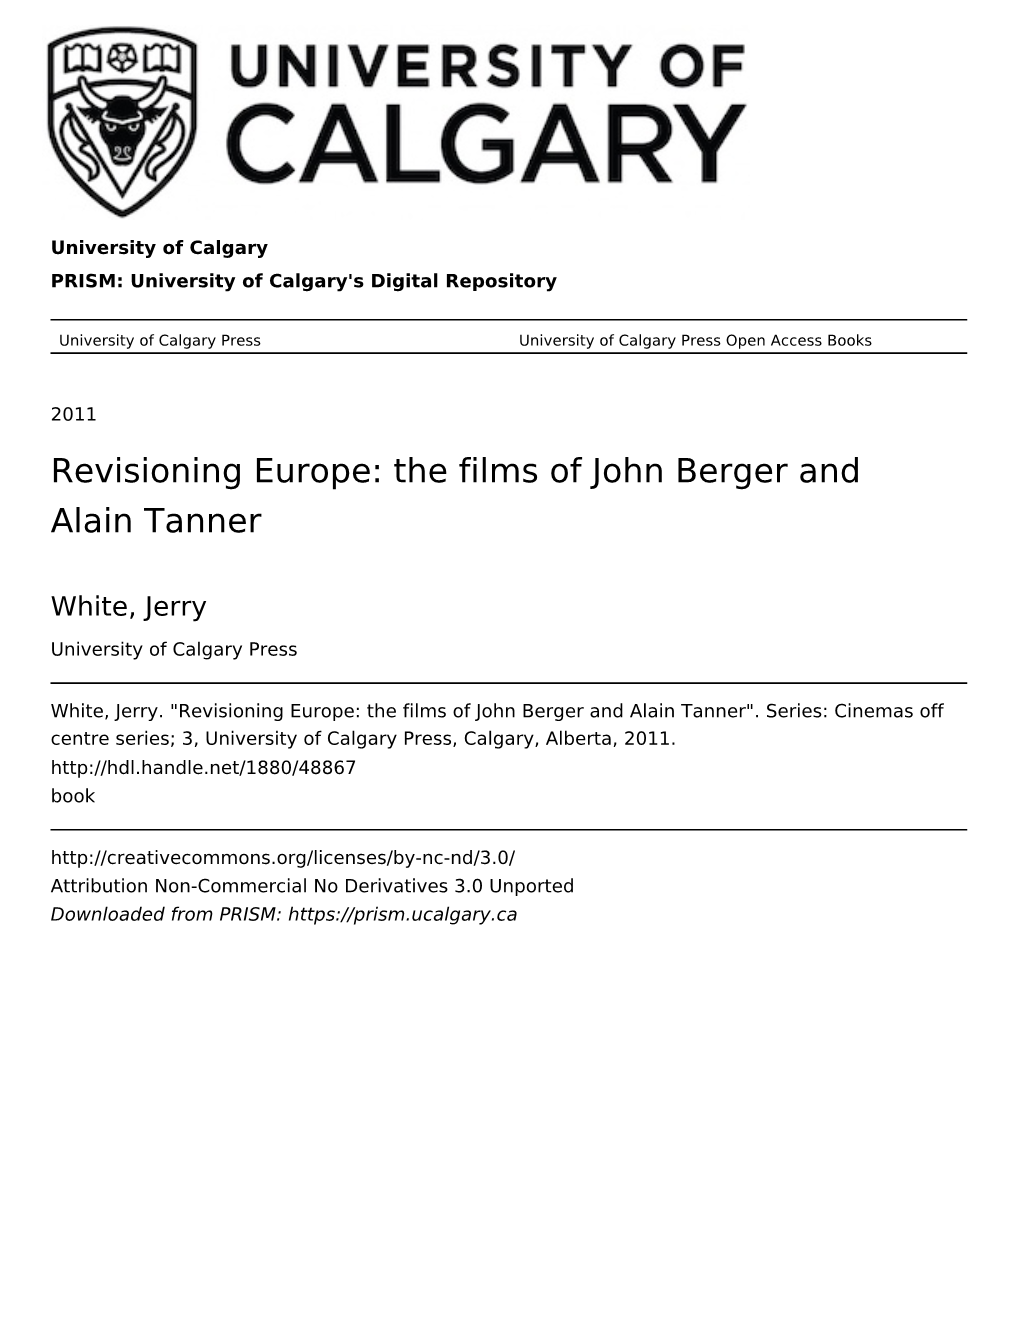 Revisioning Europe: the Films of John Berger and Alain Tanner